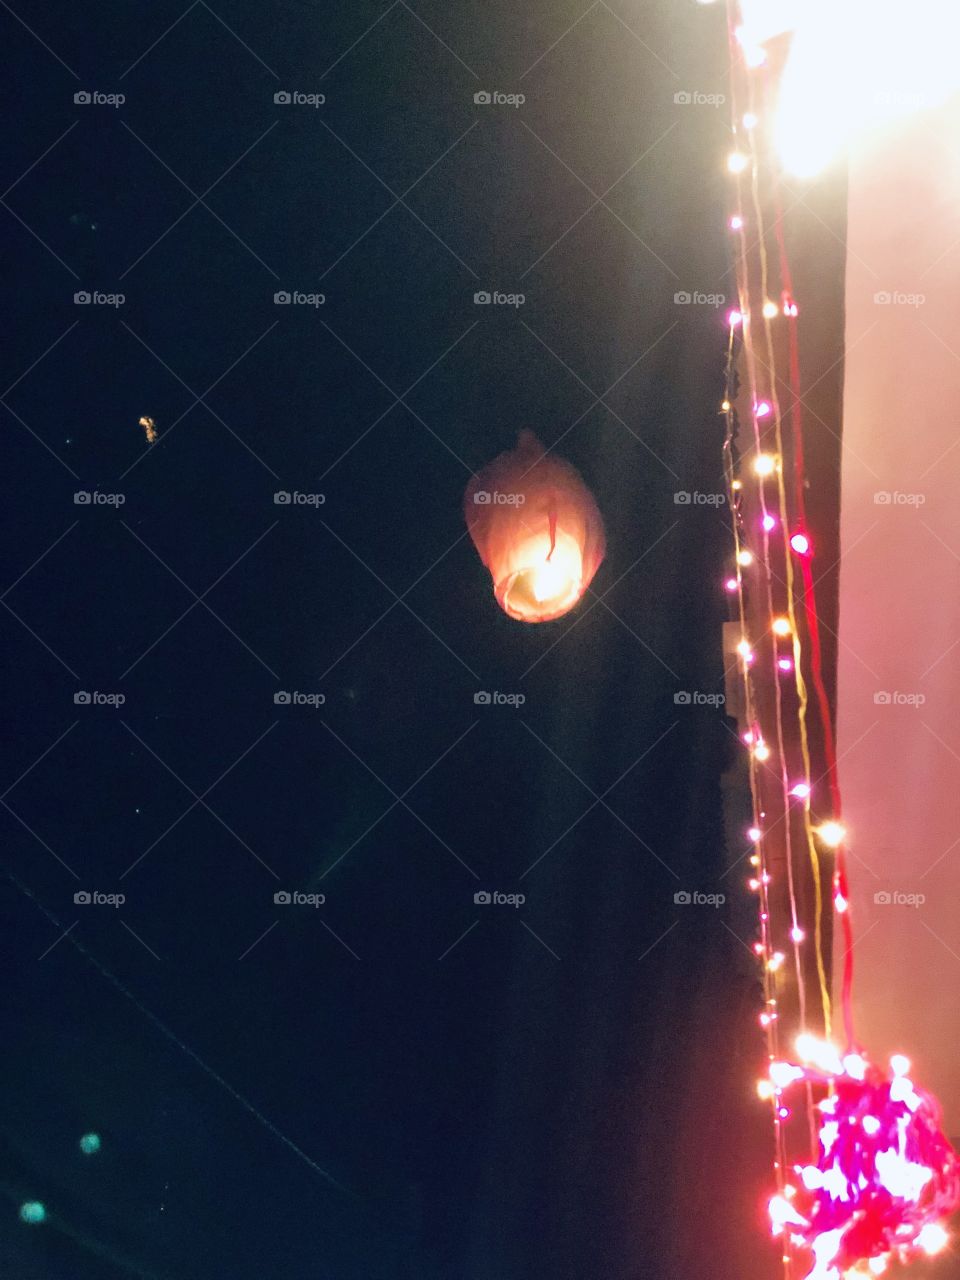 Lantern letting go of 2018 and Welcoming 2019